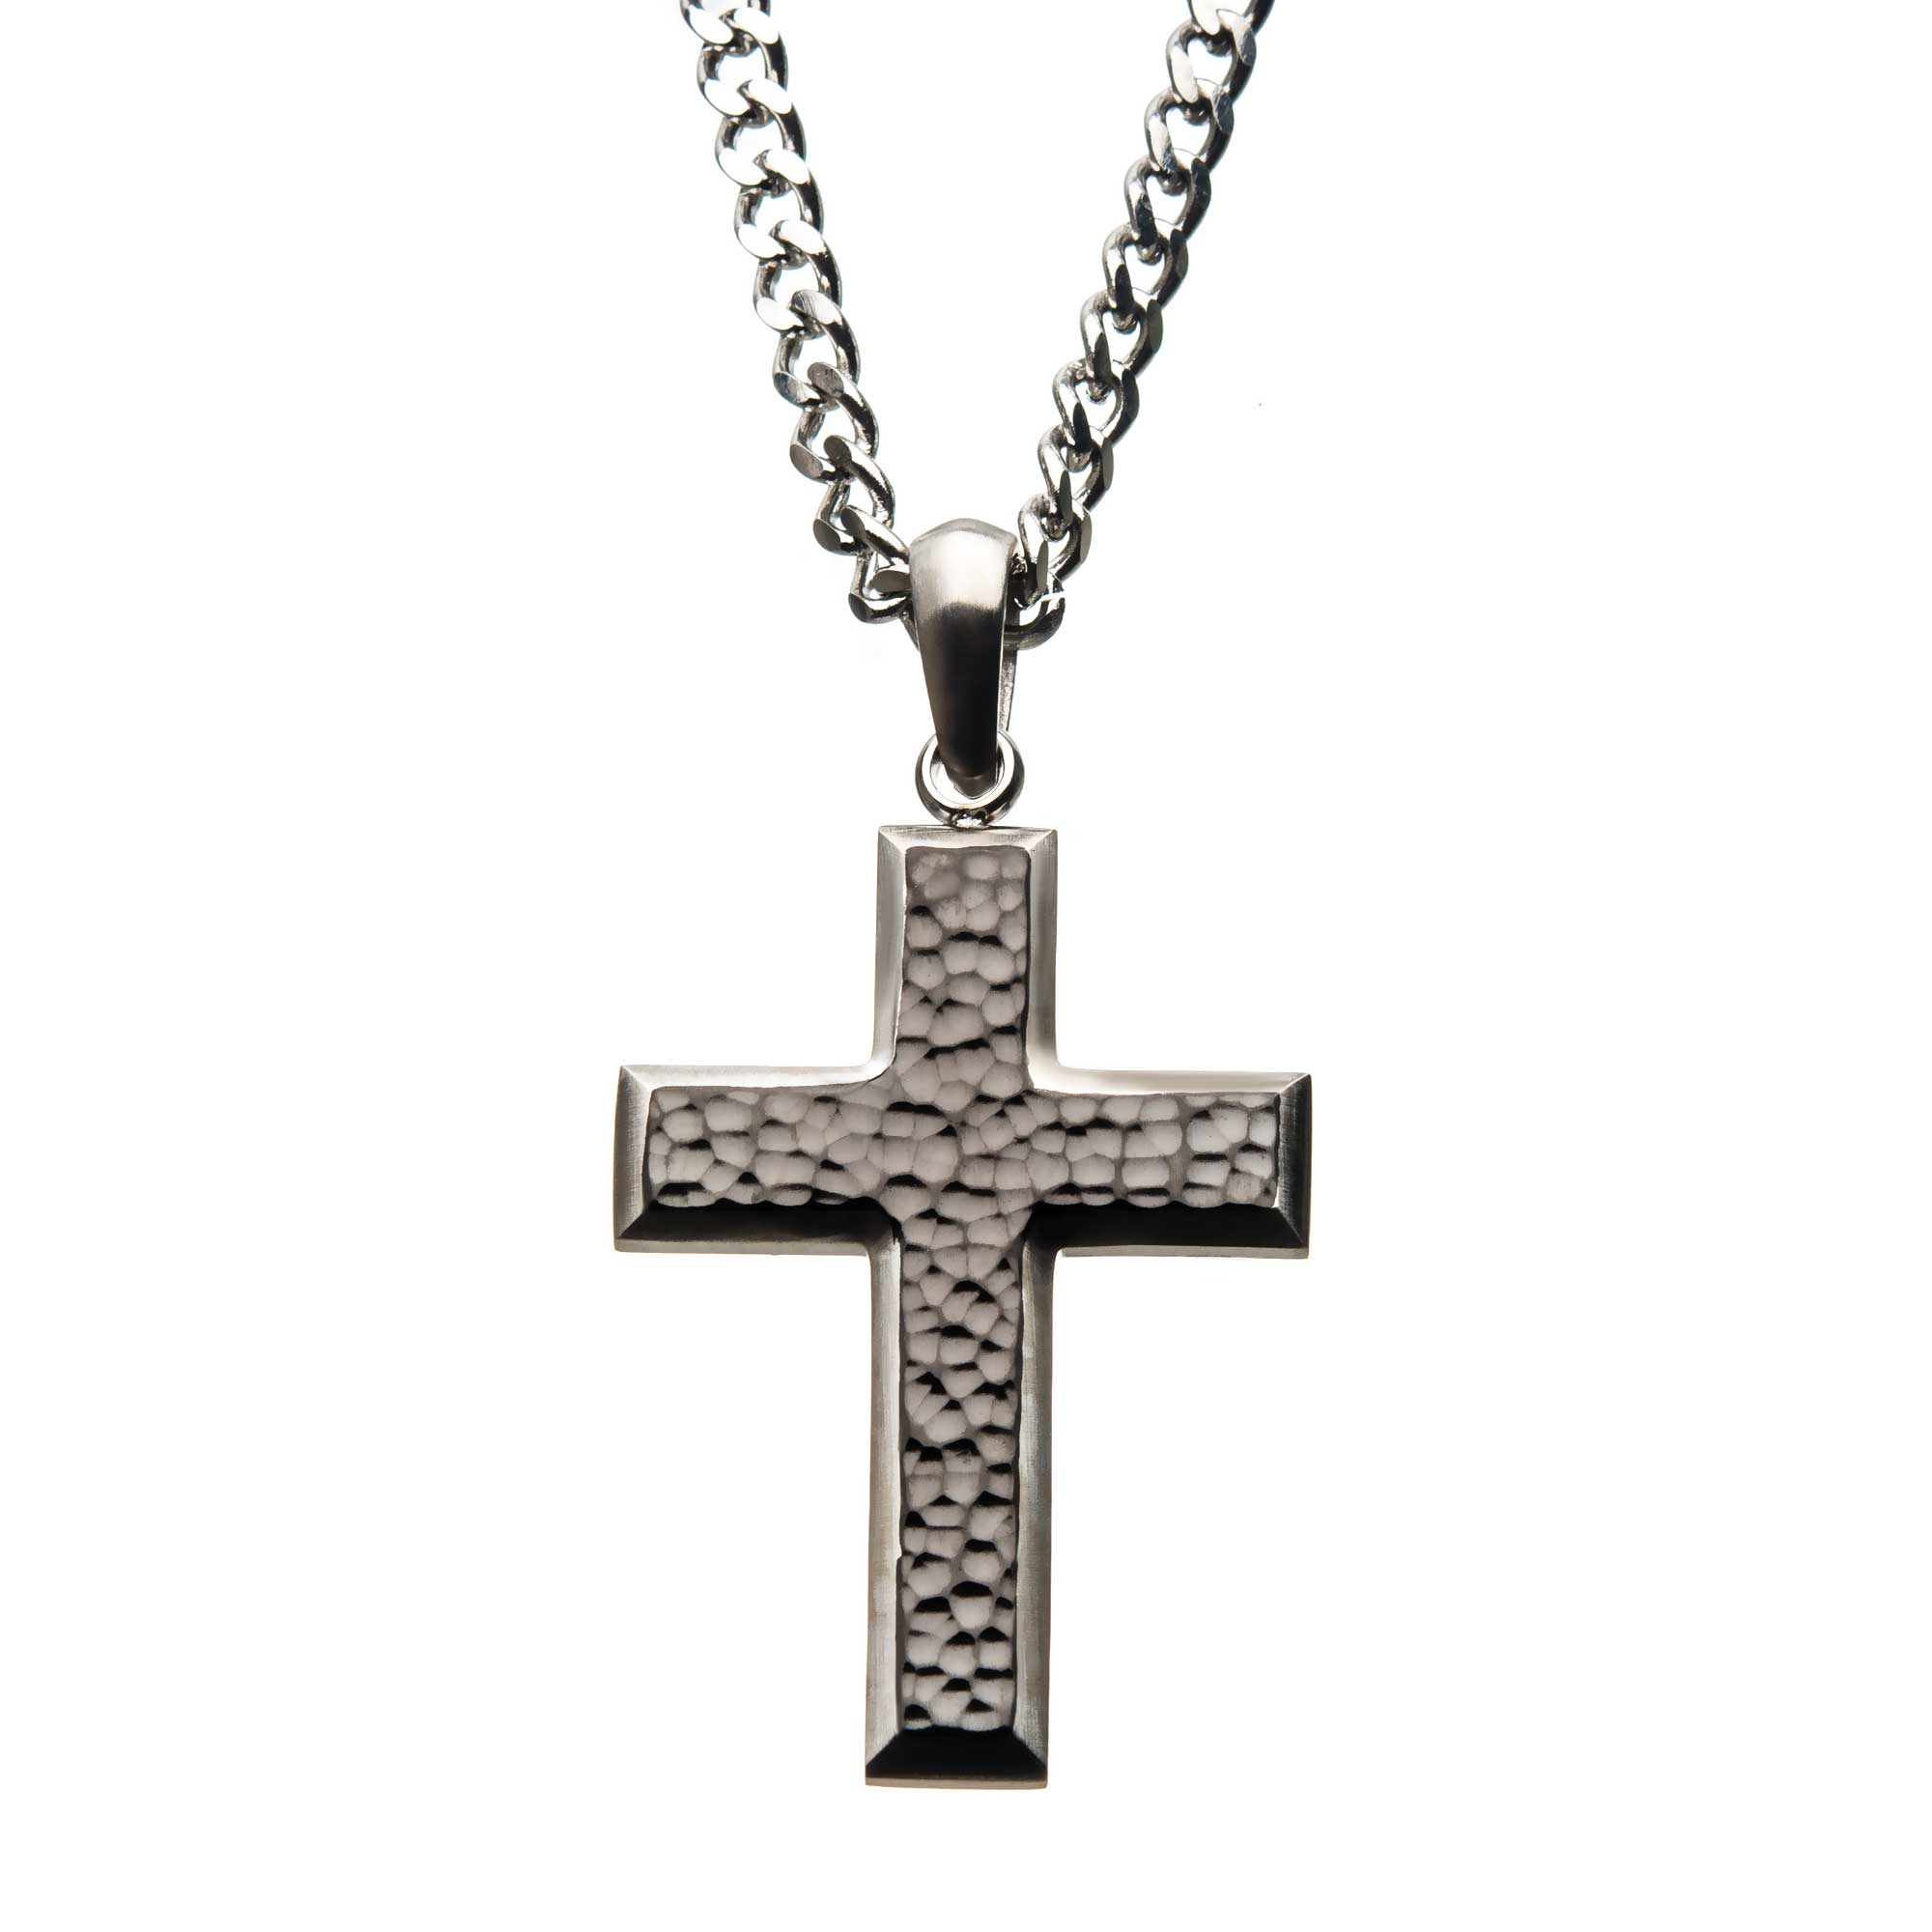 Stainless Steel Hammered Cross Pendant with Chain Thurber's Fine Jewelry Wadsworth, OH